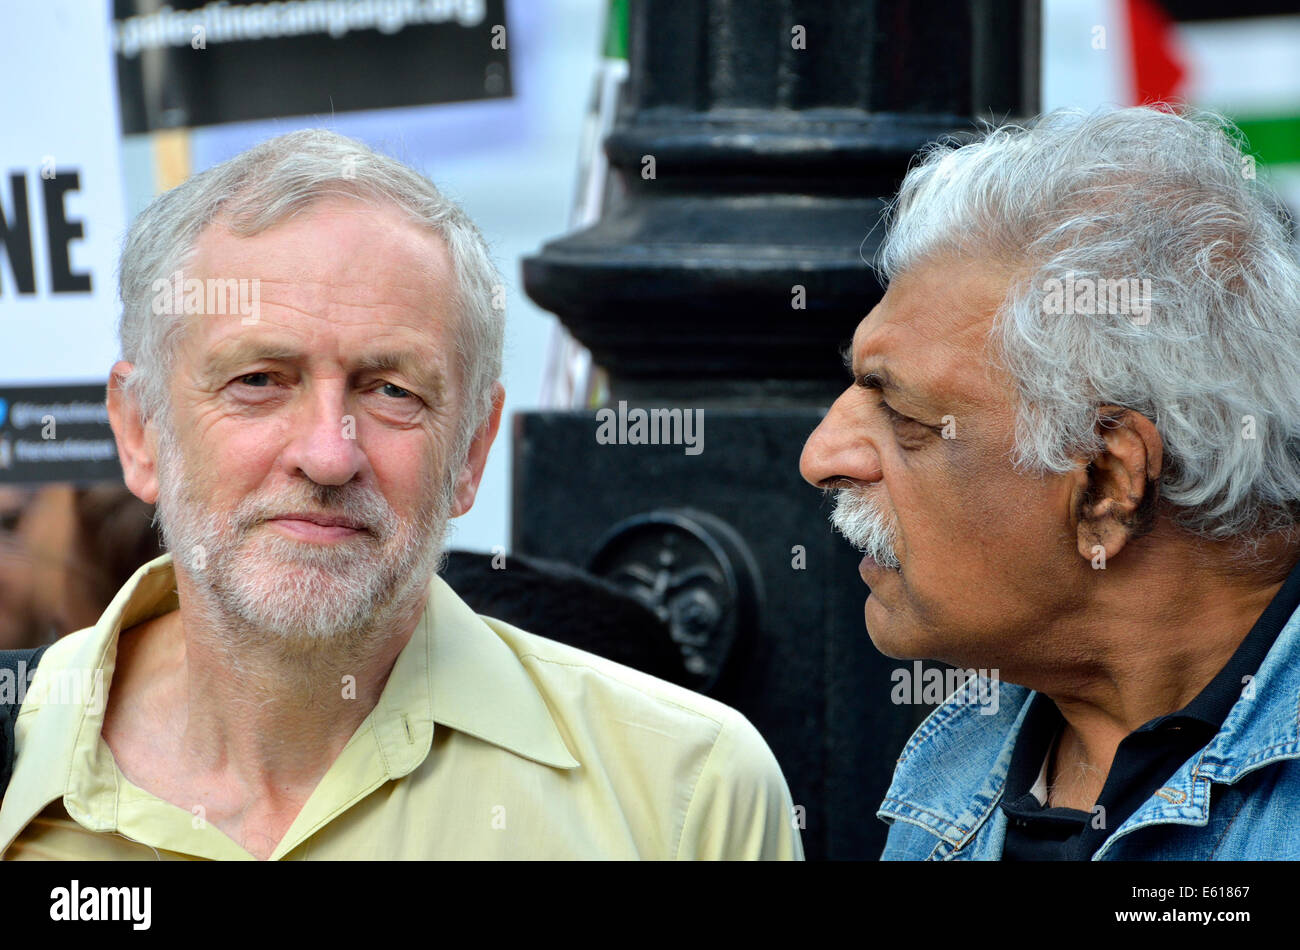 Jeremy Corbyn MP and Tariq Ali (left-wing British Pakistani writer and broadcaster) at the March for Gaza, London, 9th Aug 2014 Stock Photo